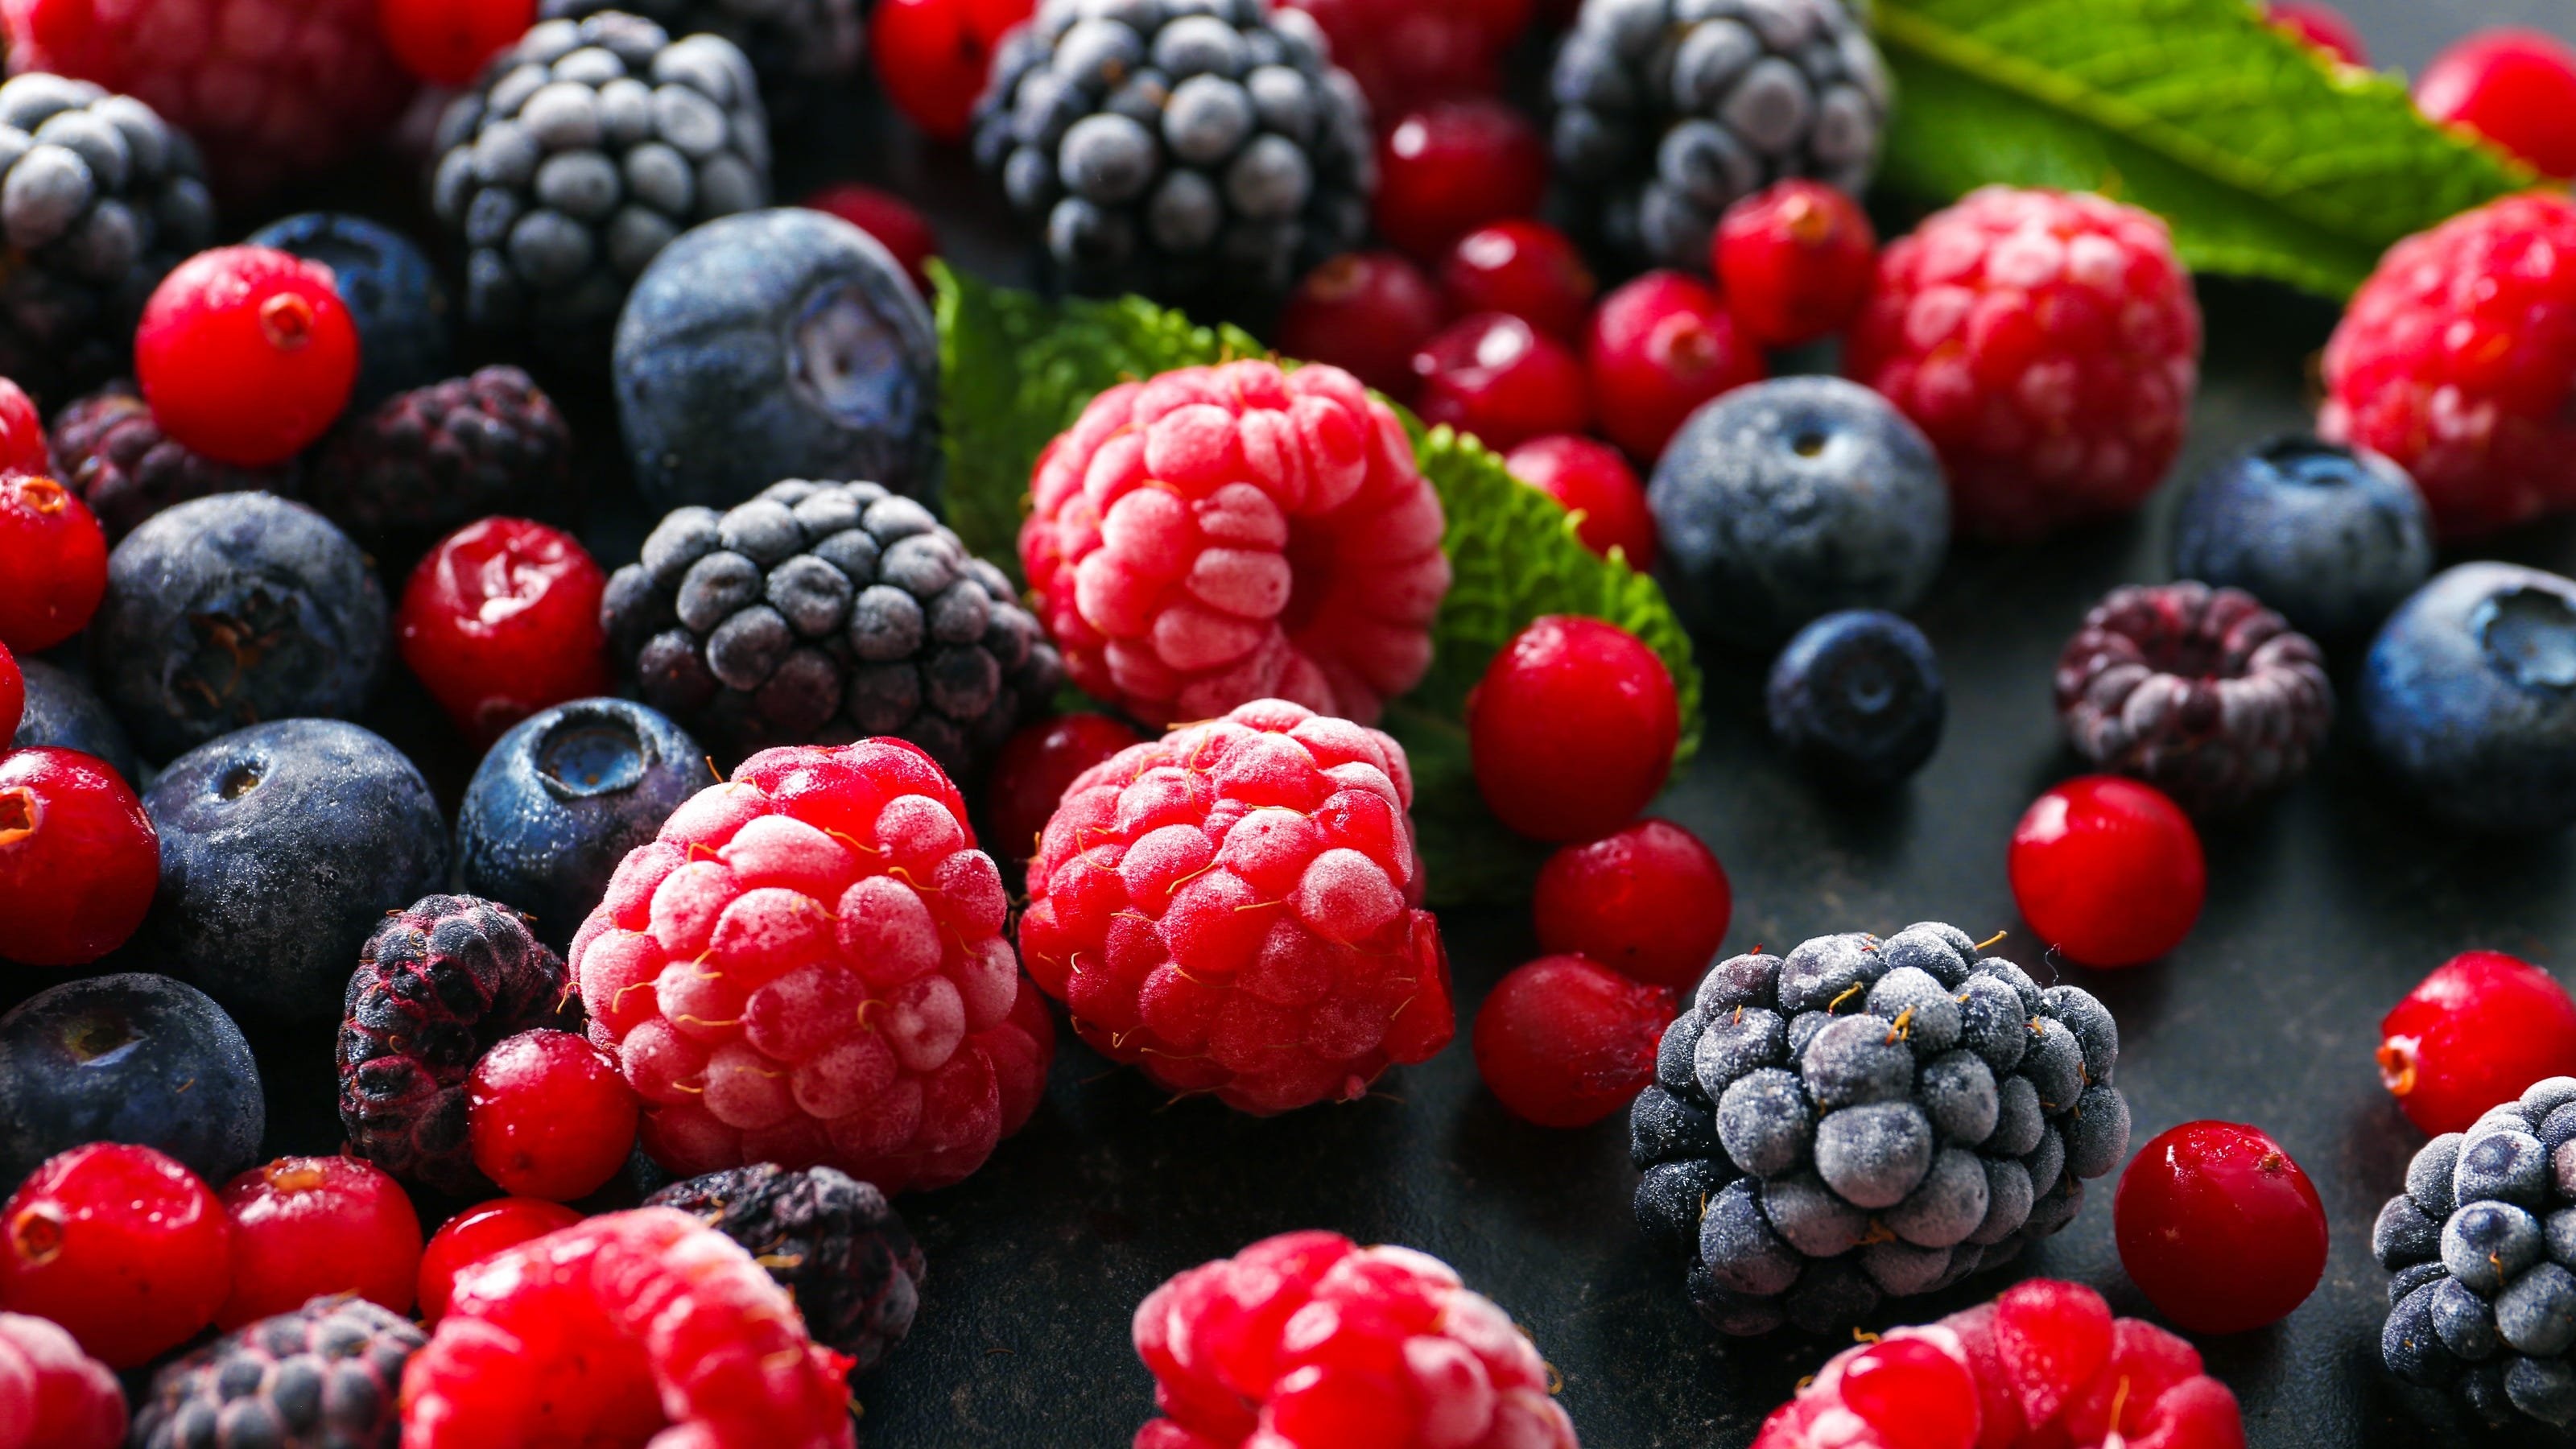 Captivating berry wallpaper, A feast for the eyes, Nature's bounty, Stunning image, 3200x1800 HD Desktop